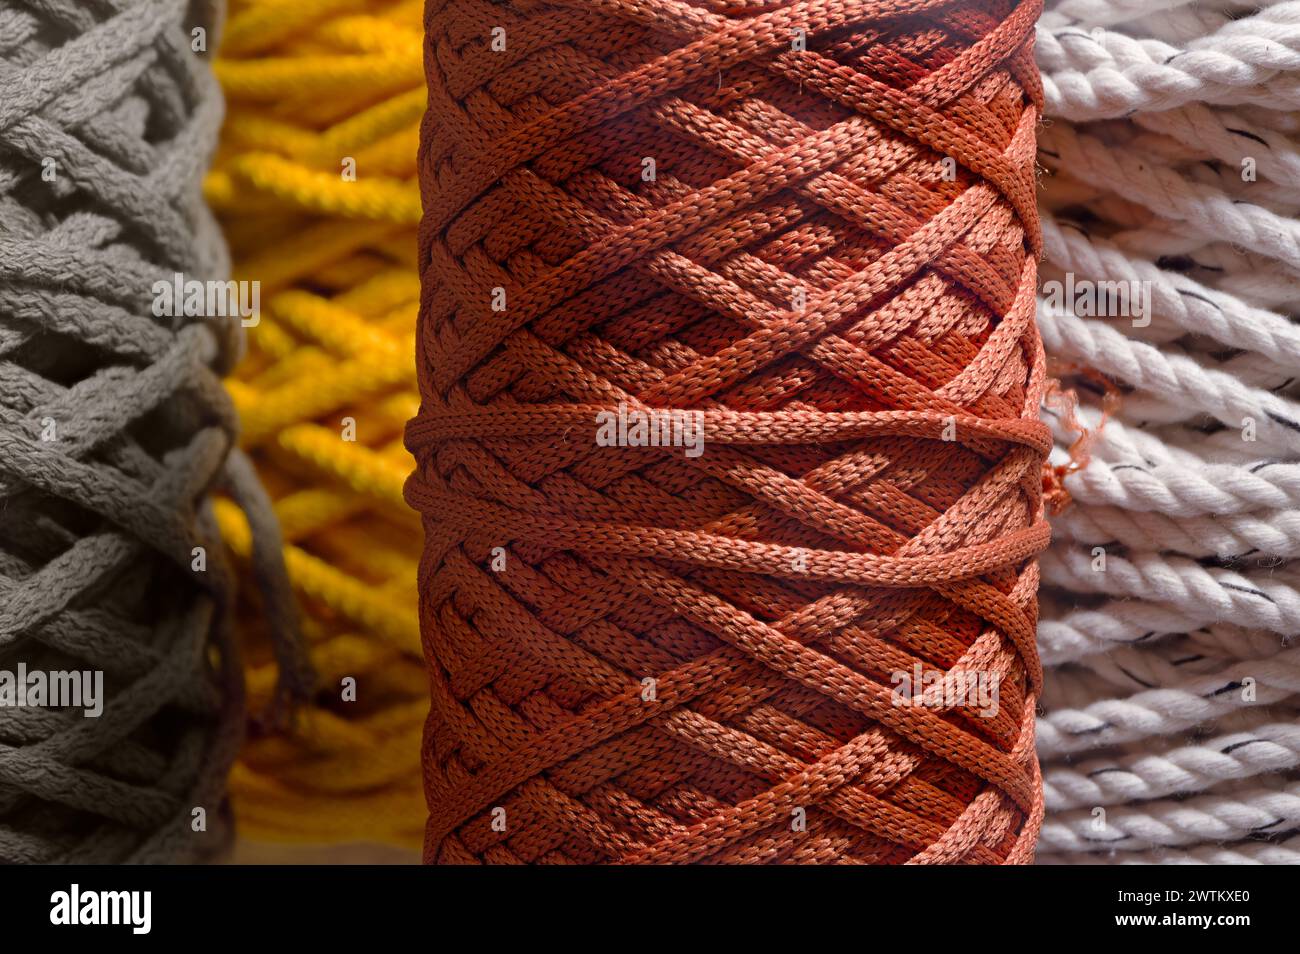 Assorted skeins of multi-coloured braided synthetic cord, abstract textile industry background Stock Photo